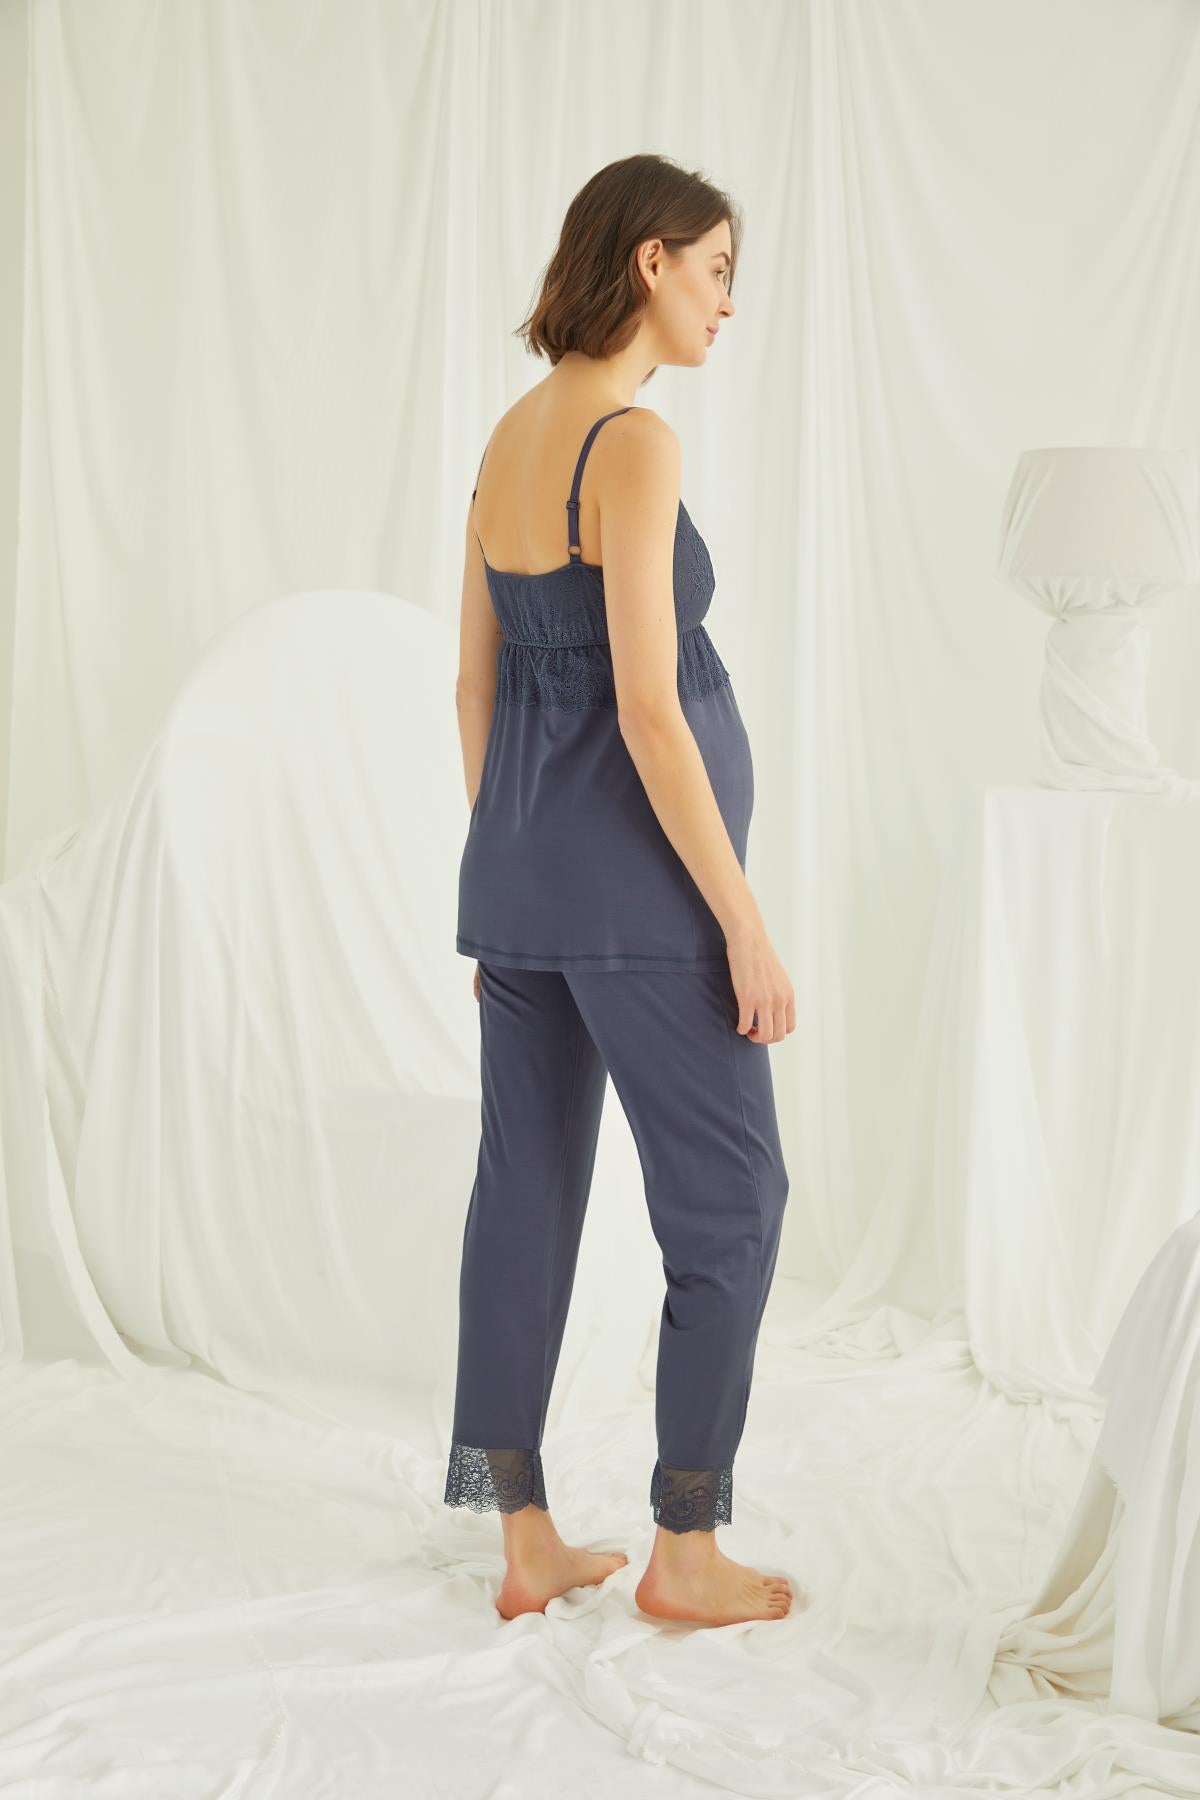 Lace Strappy 3-Pieces Maternity & Nursing Pajamas With Robe Navy Blue - 18432